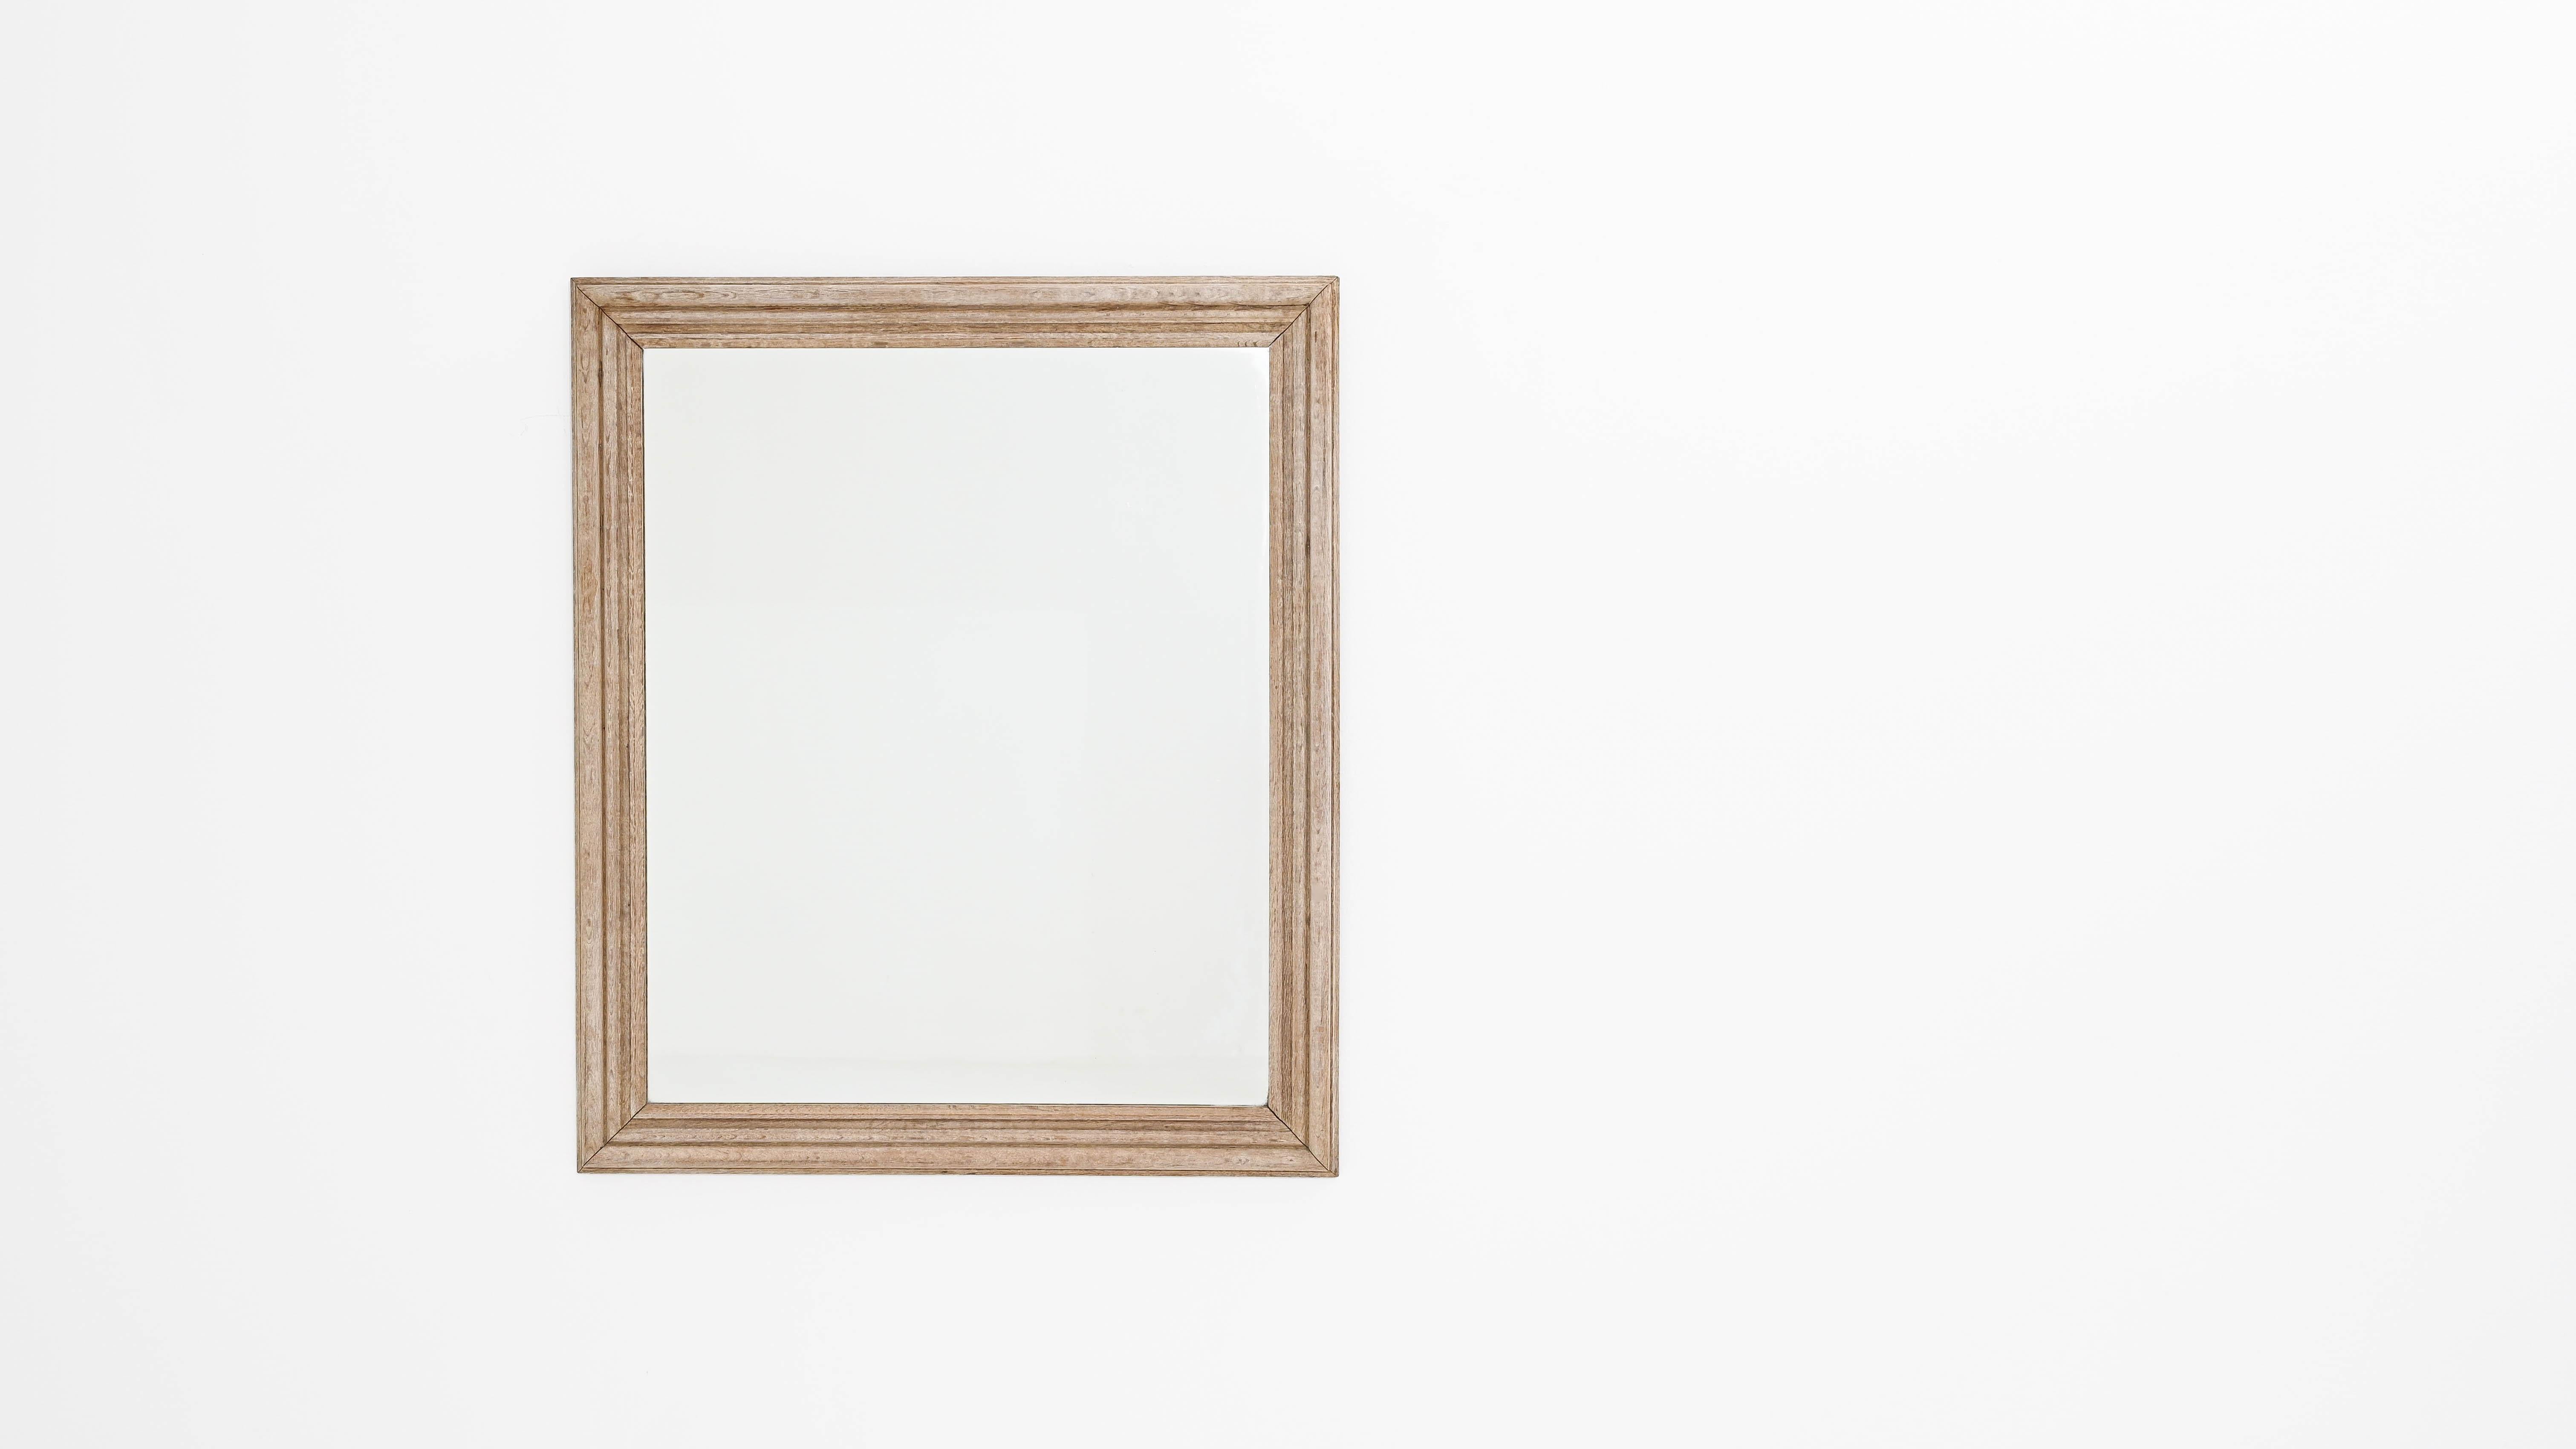 This vintage mirror in natural oak has an elegant simplicity. Made in Belgium at the turn of the century, the clean lines of the wooden frame border an ample pane of bright glass. The large size of the mirror naturally amplifies the light in a room,